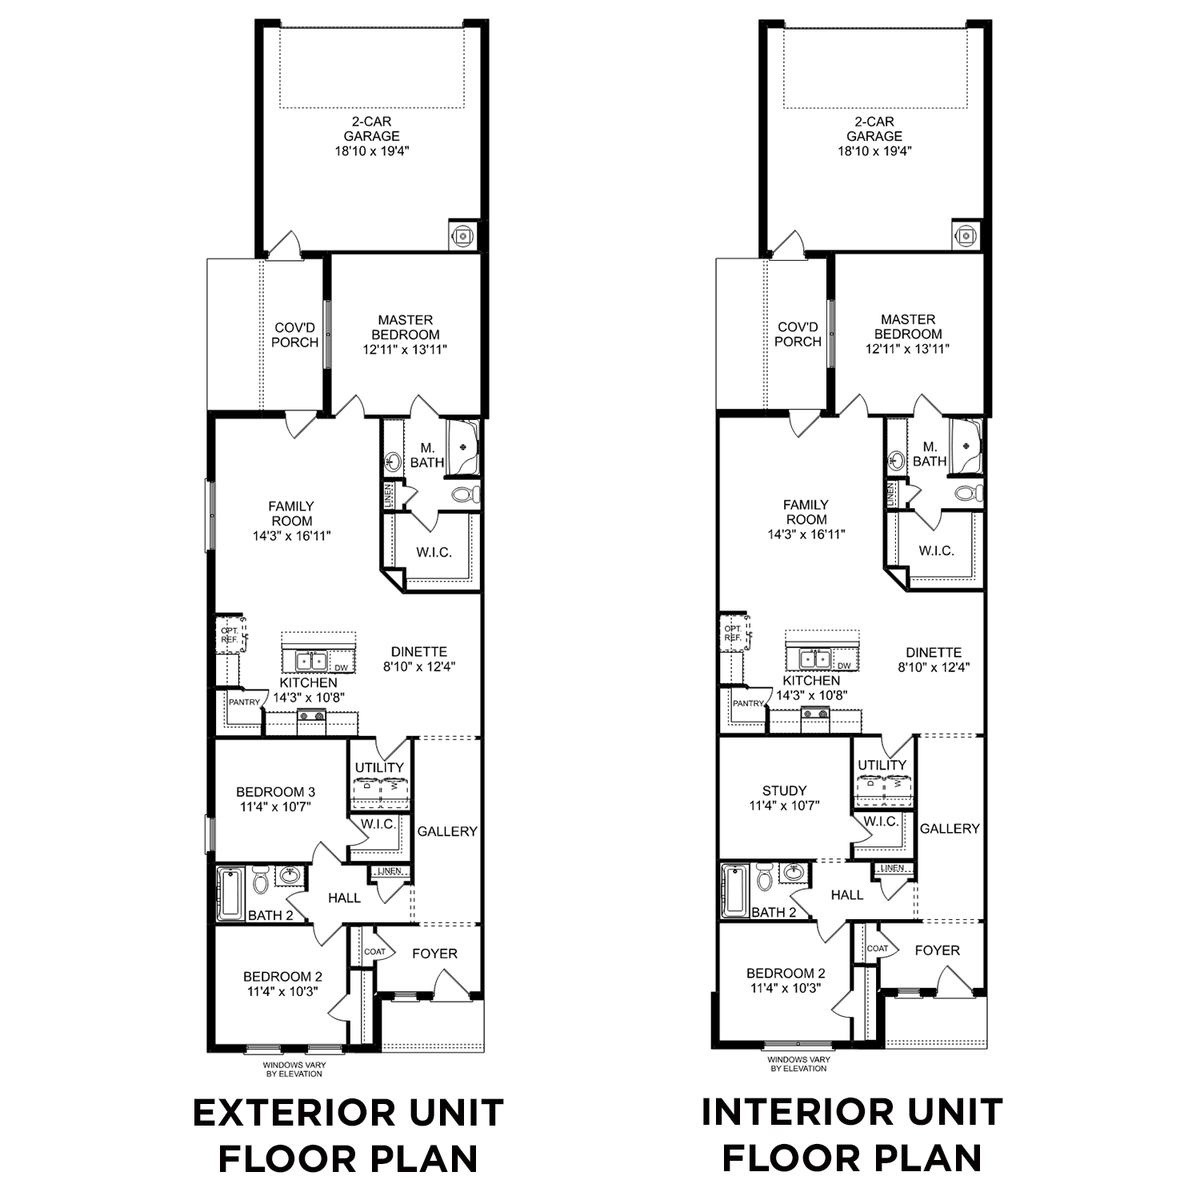 1 - The Camilla D floor plan layout for 419 Ronnie Drive in Davidson Homes' Cain Park community.